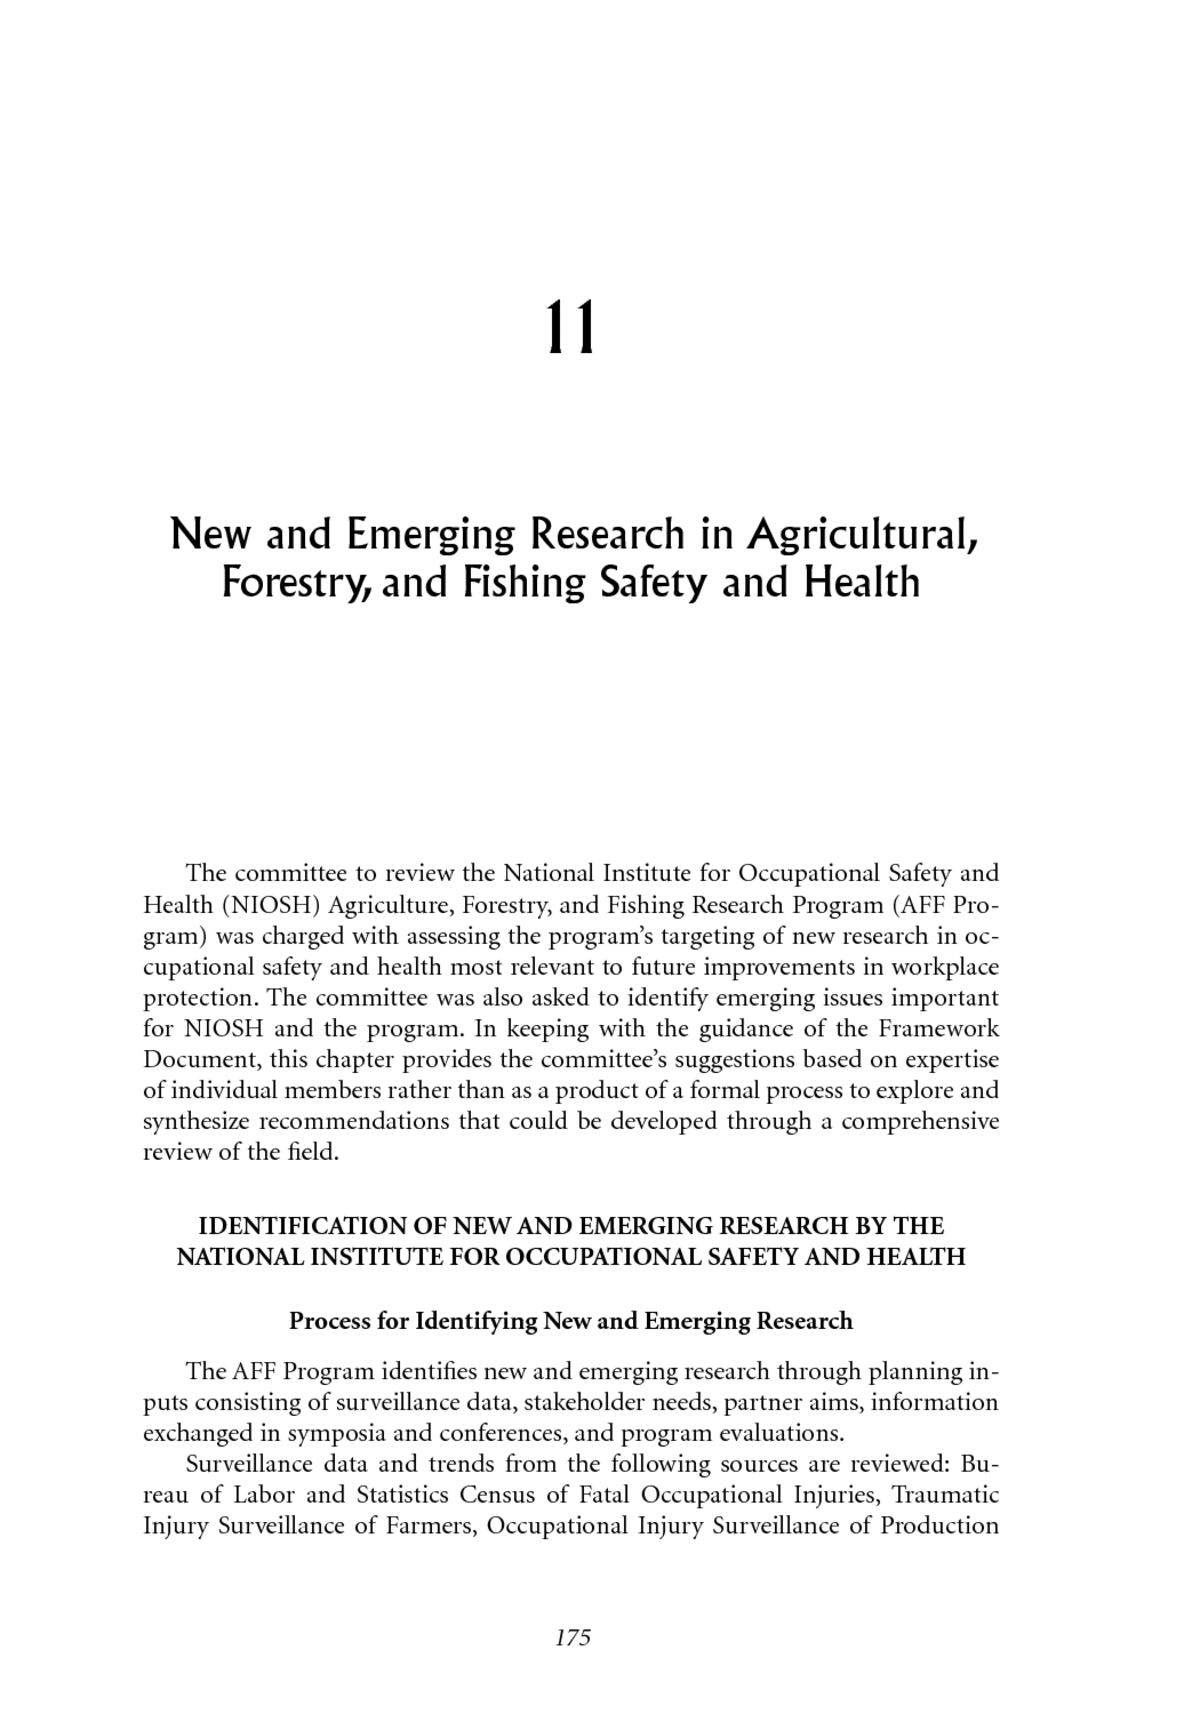 research proposal on forestry